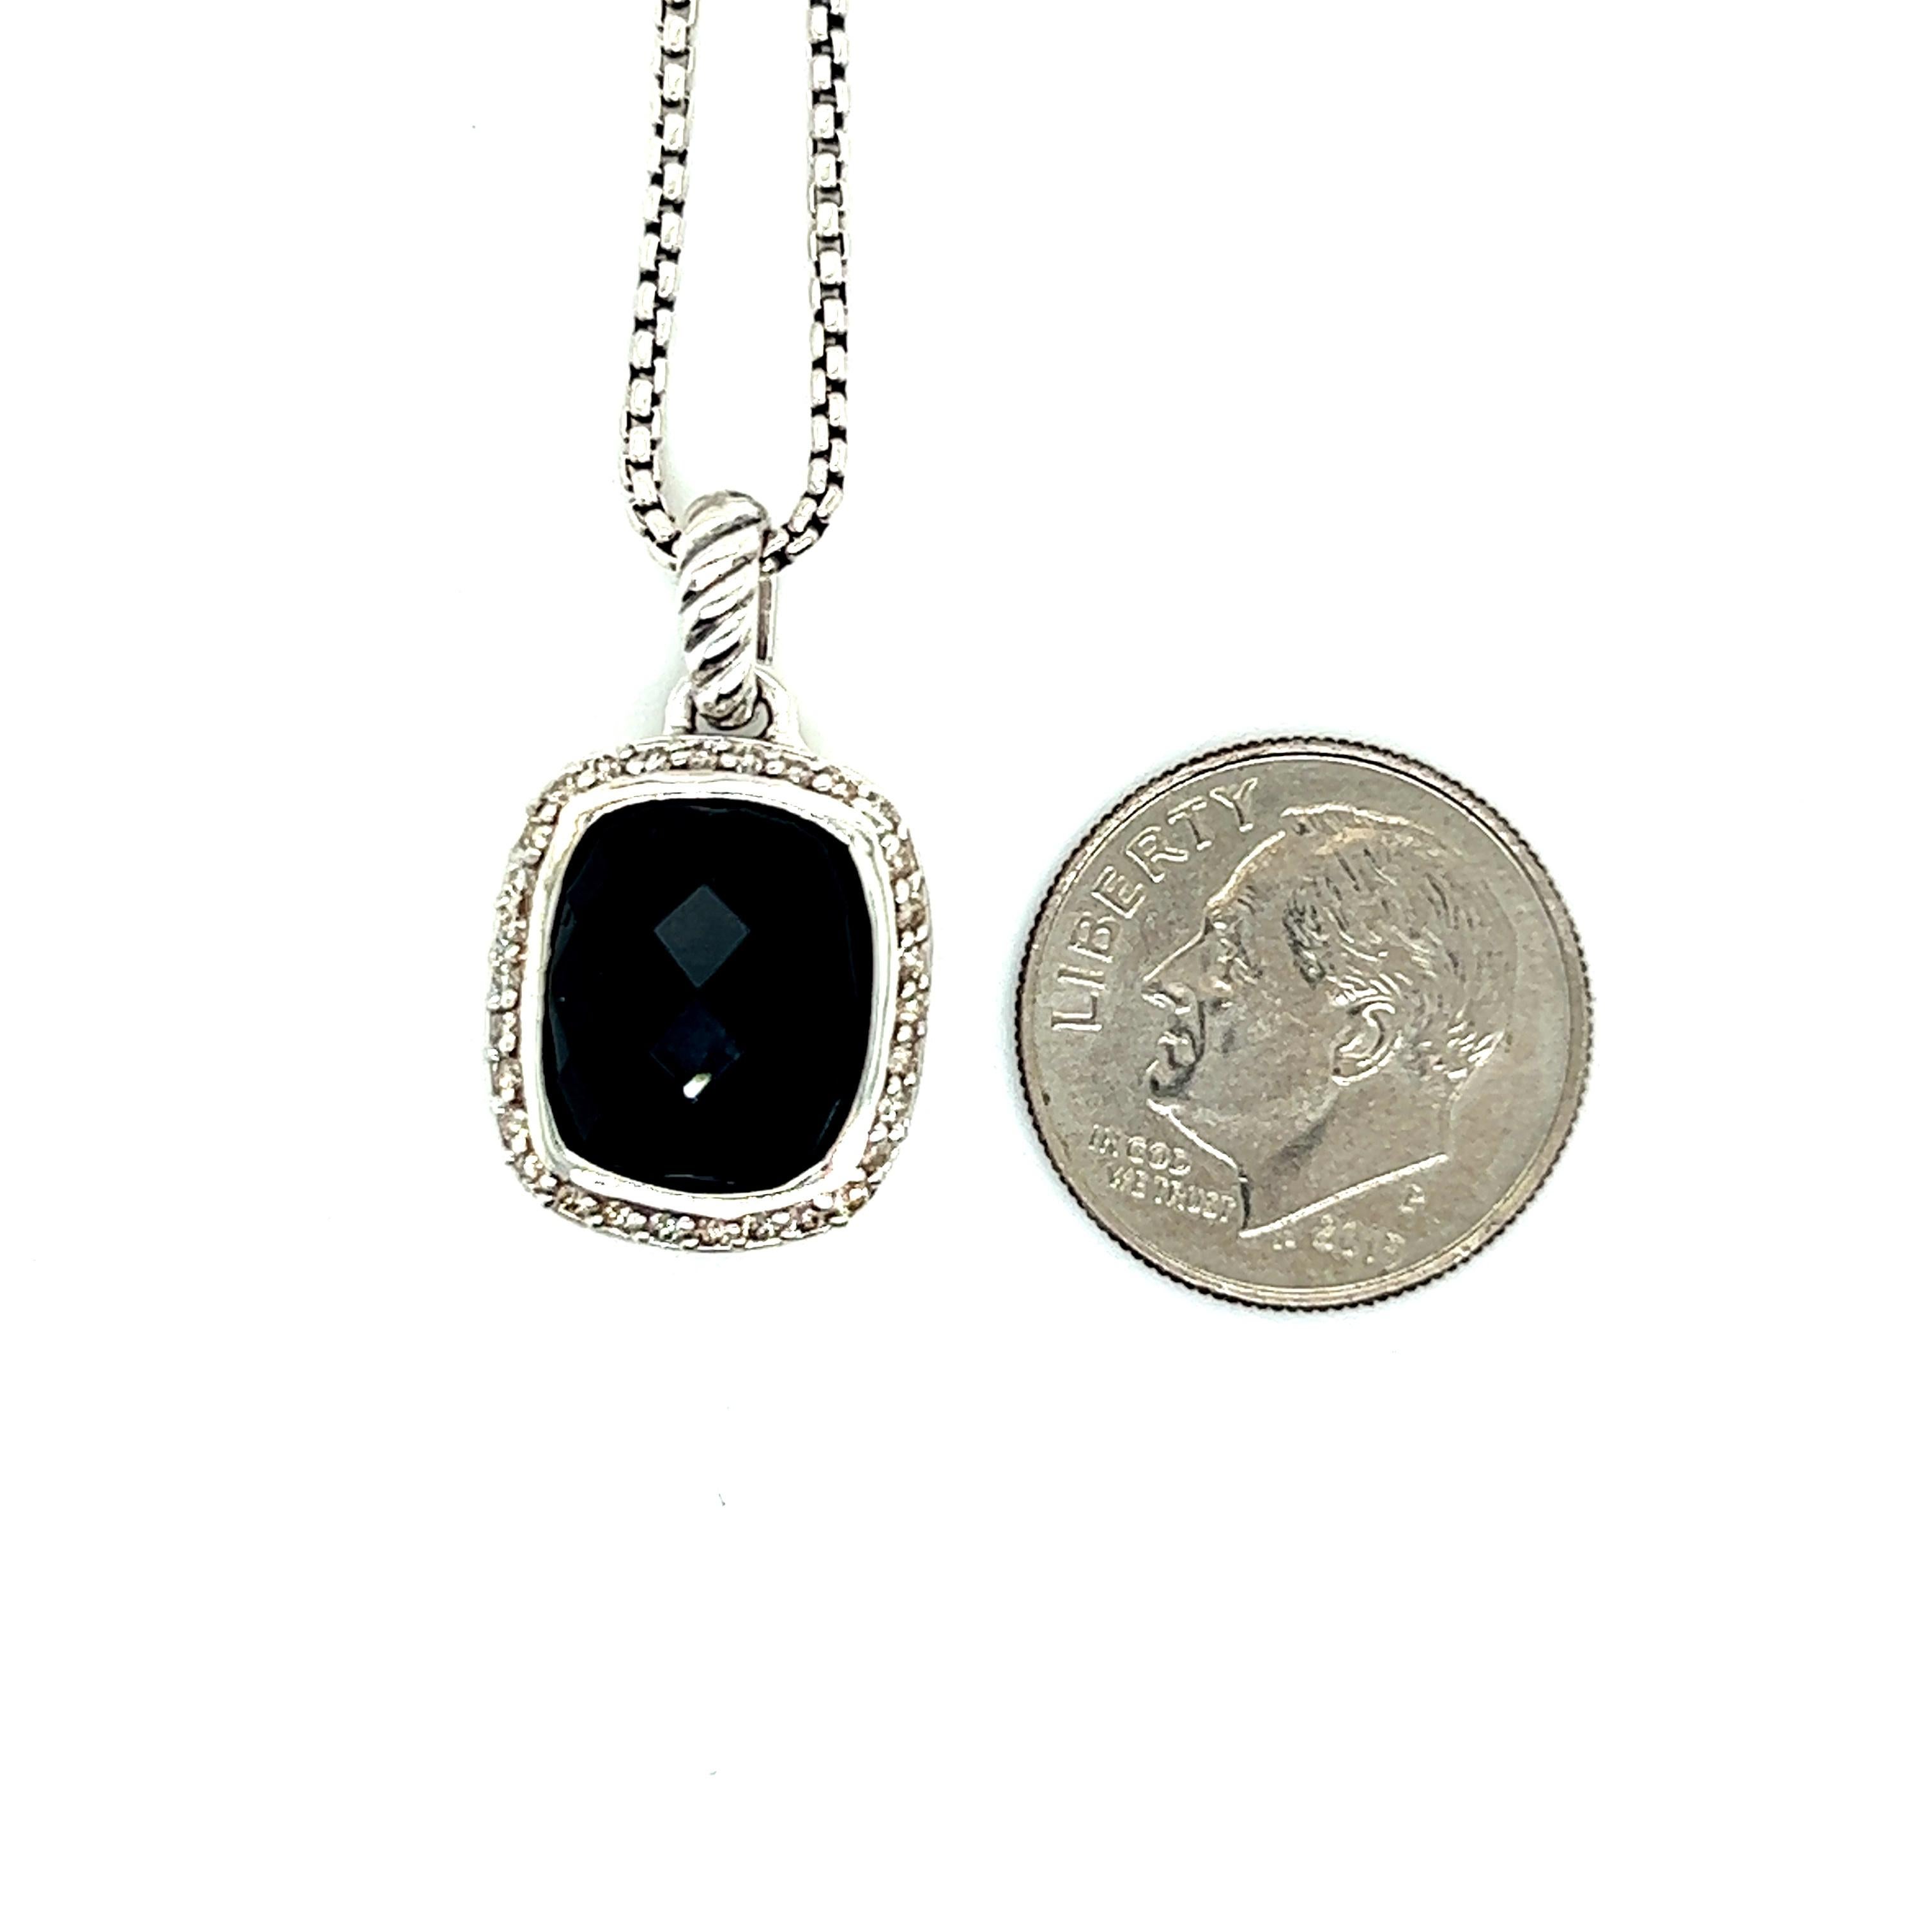 David Yurman Authentic Estate Onyx Noblesse Pendant Necklace Silver 0.25 Cts In Good Condition For Sale In Brooklyn, NY